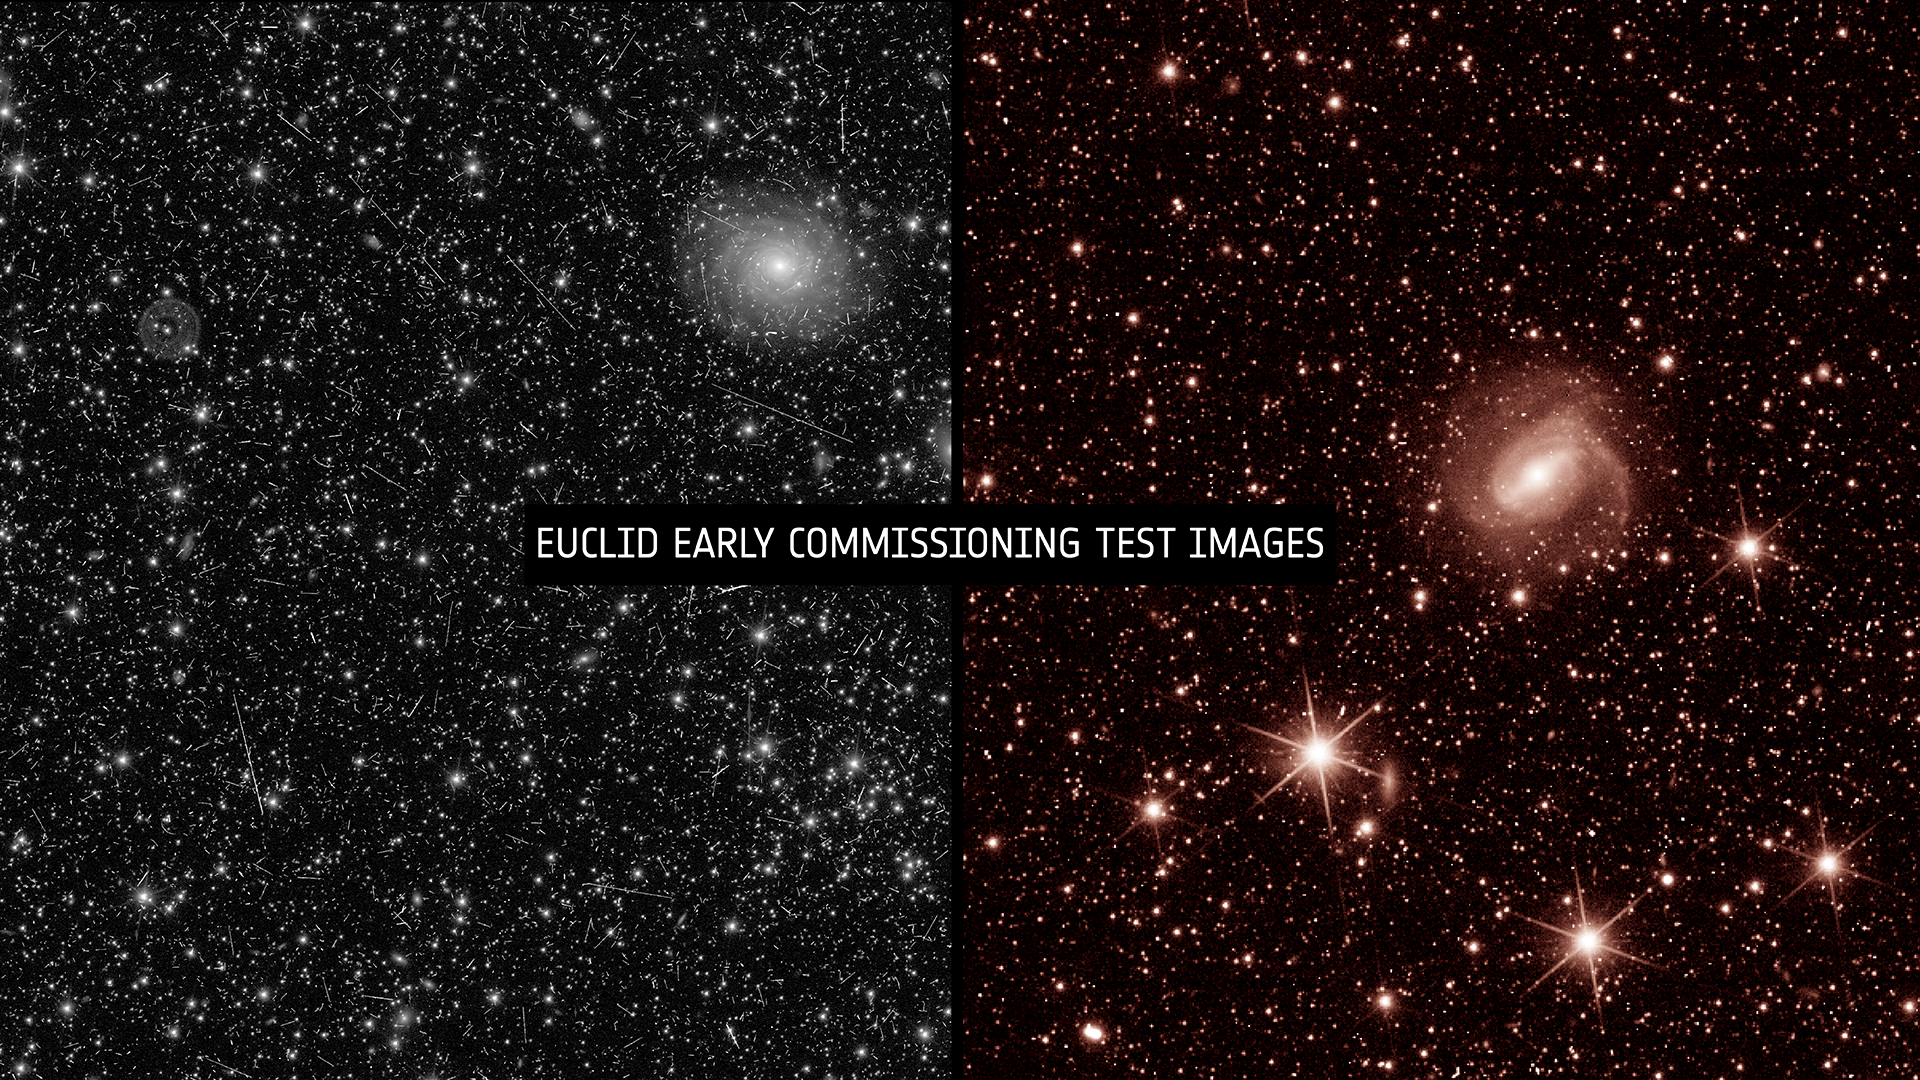 Euclid early commissioning test images